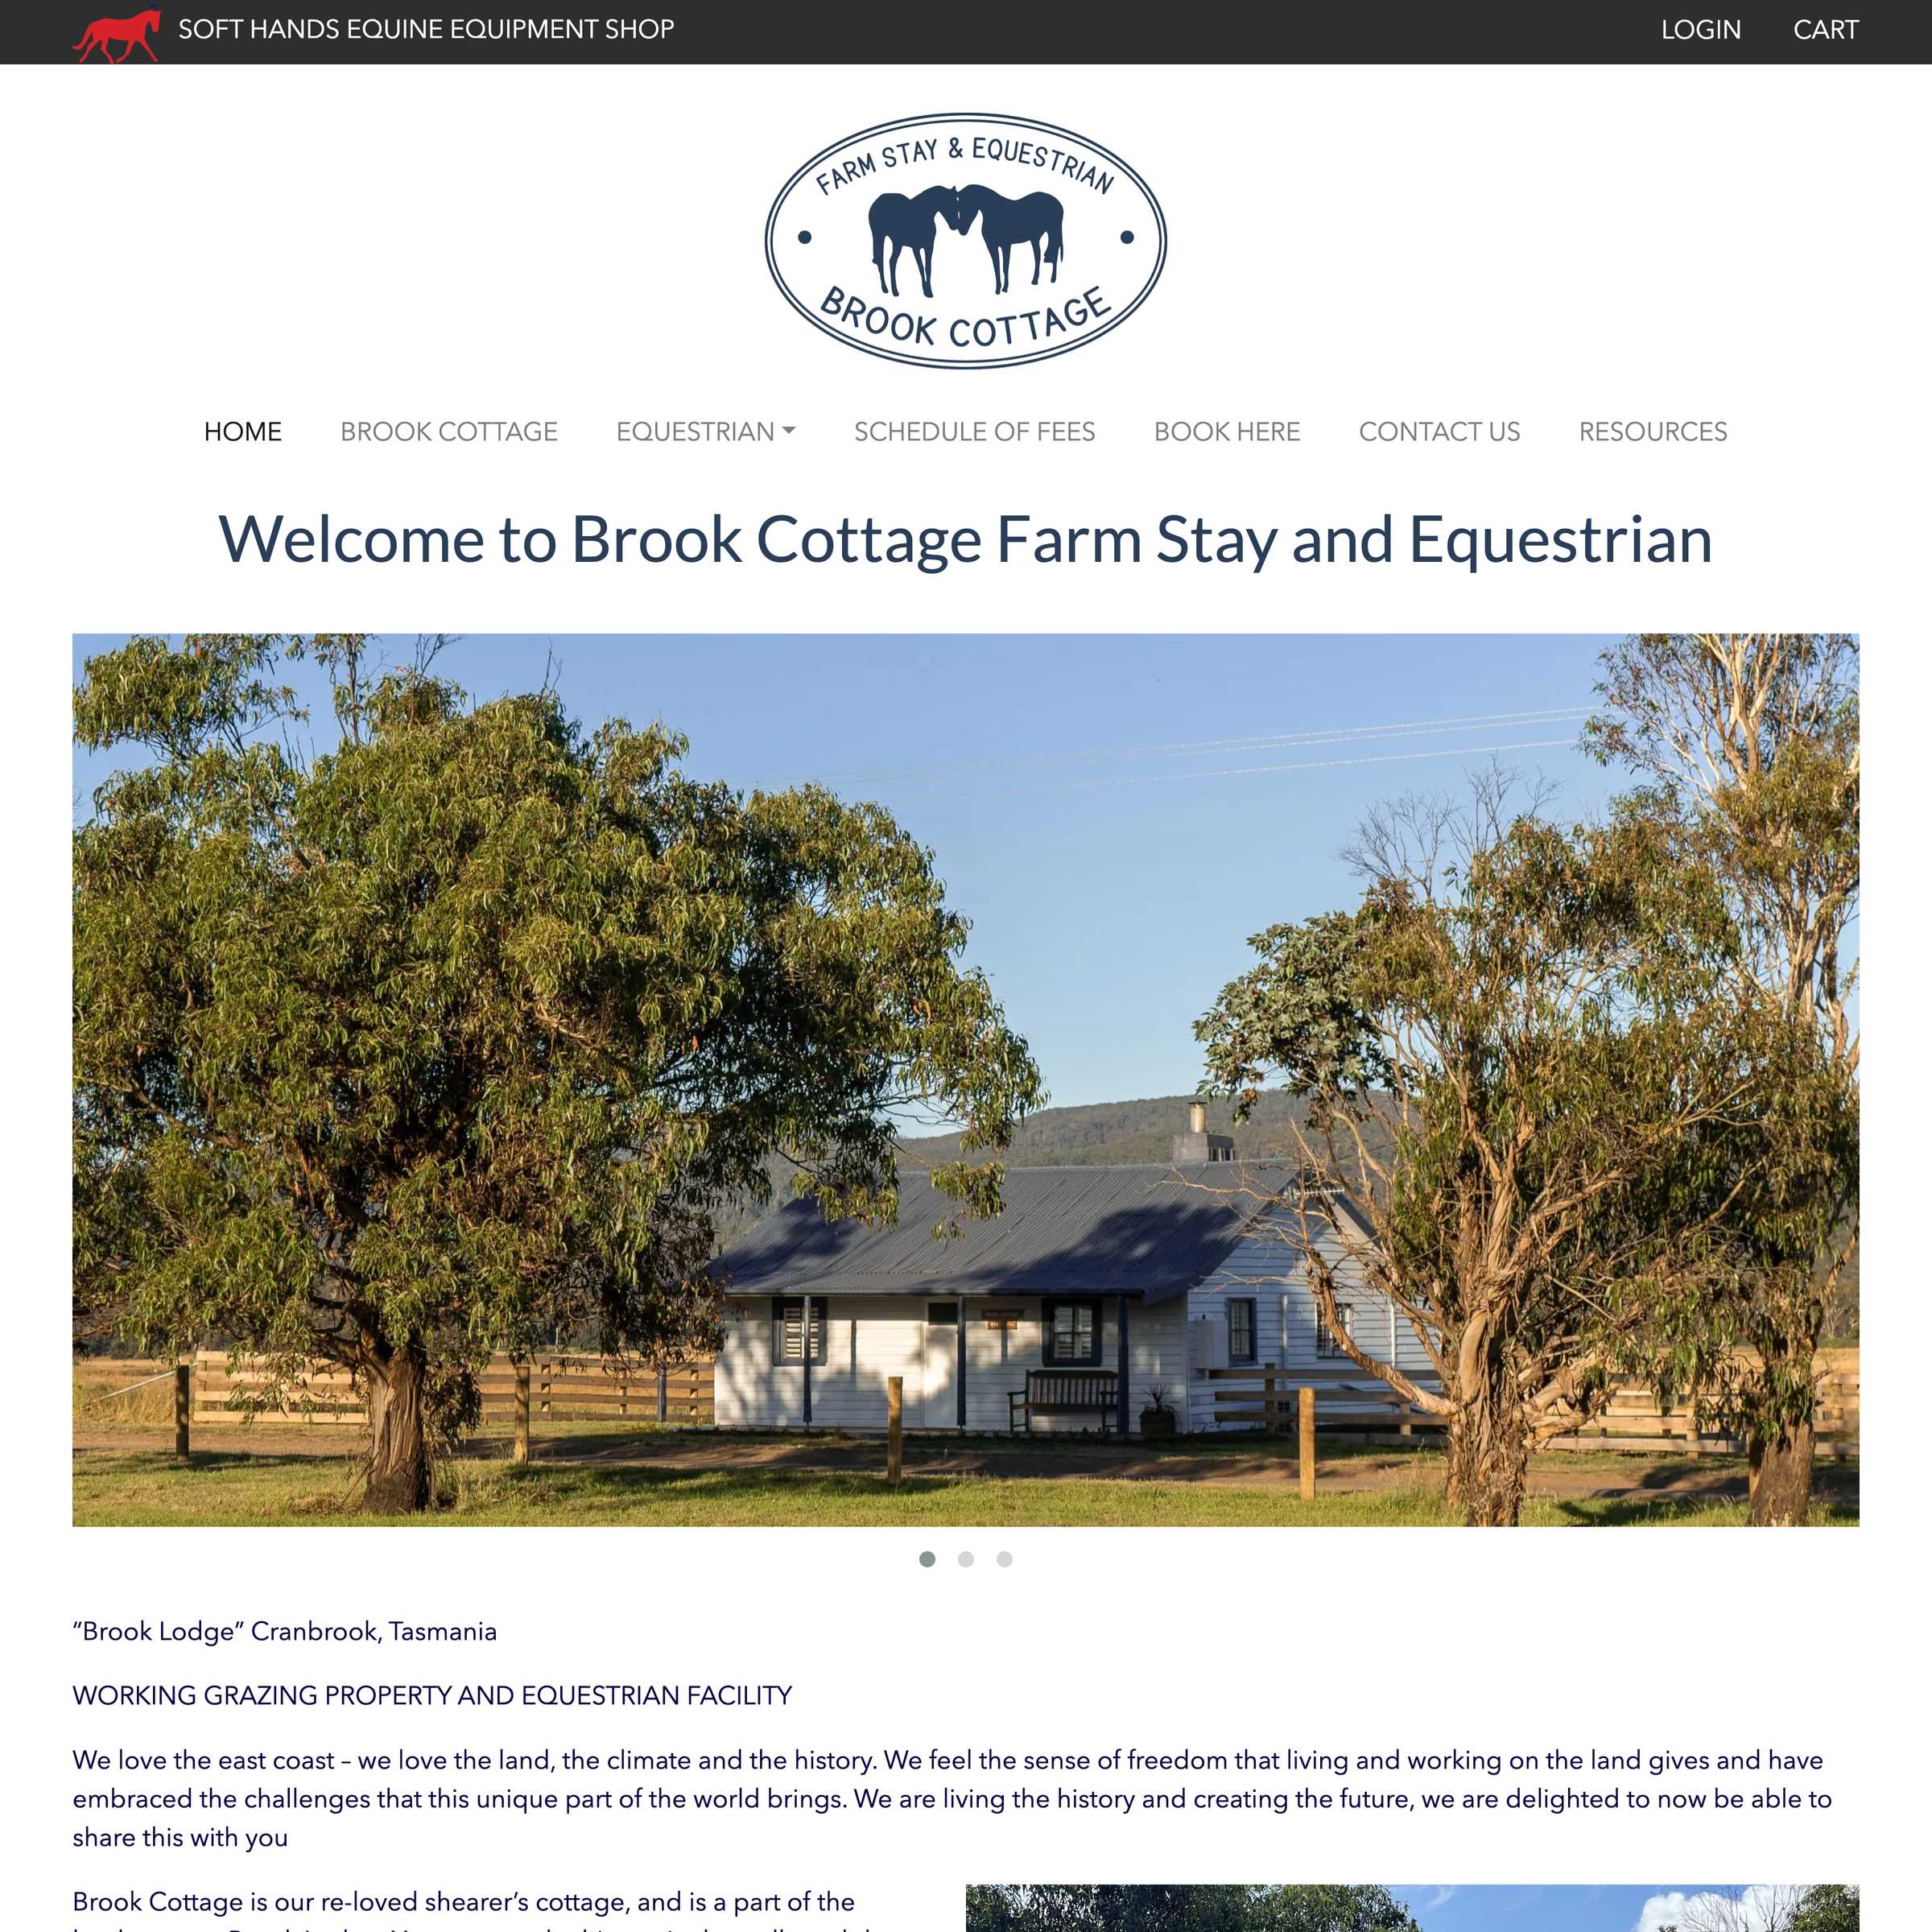 Screenshot of the Brook Cottage project